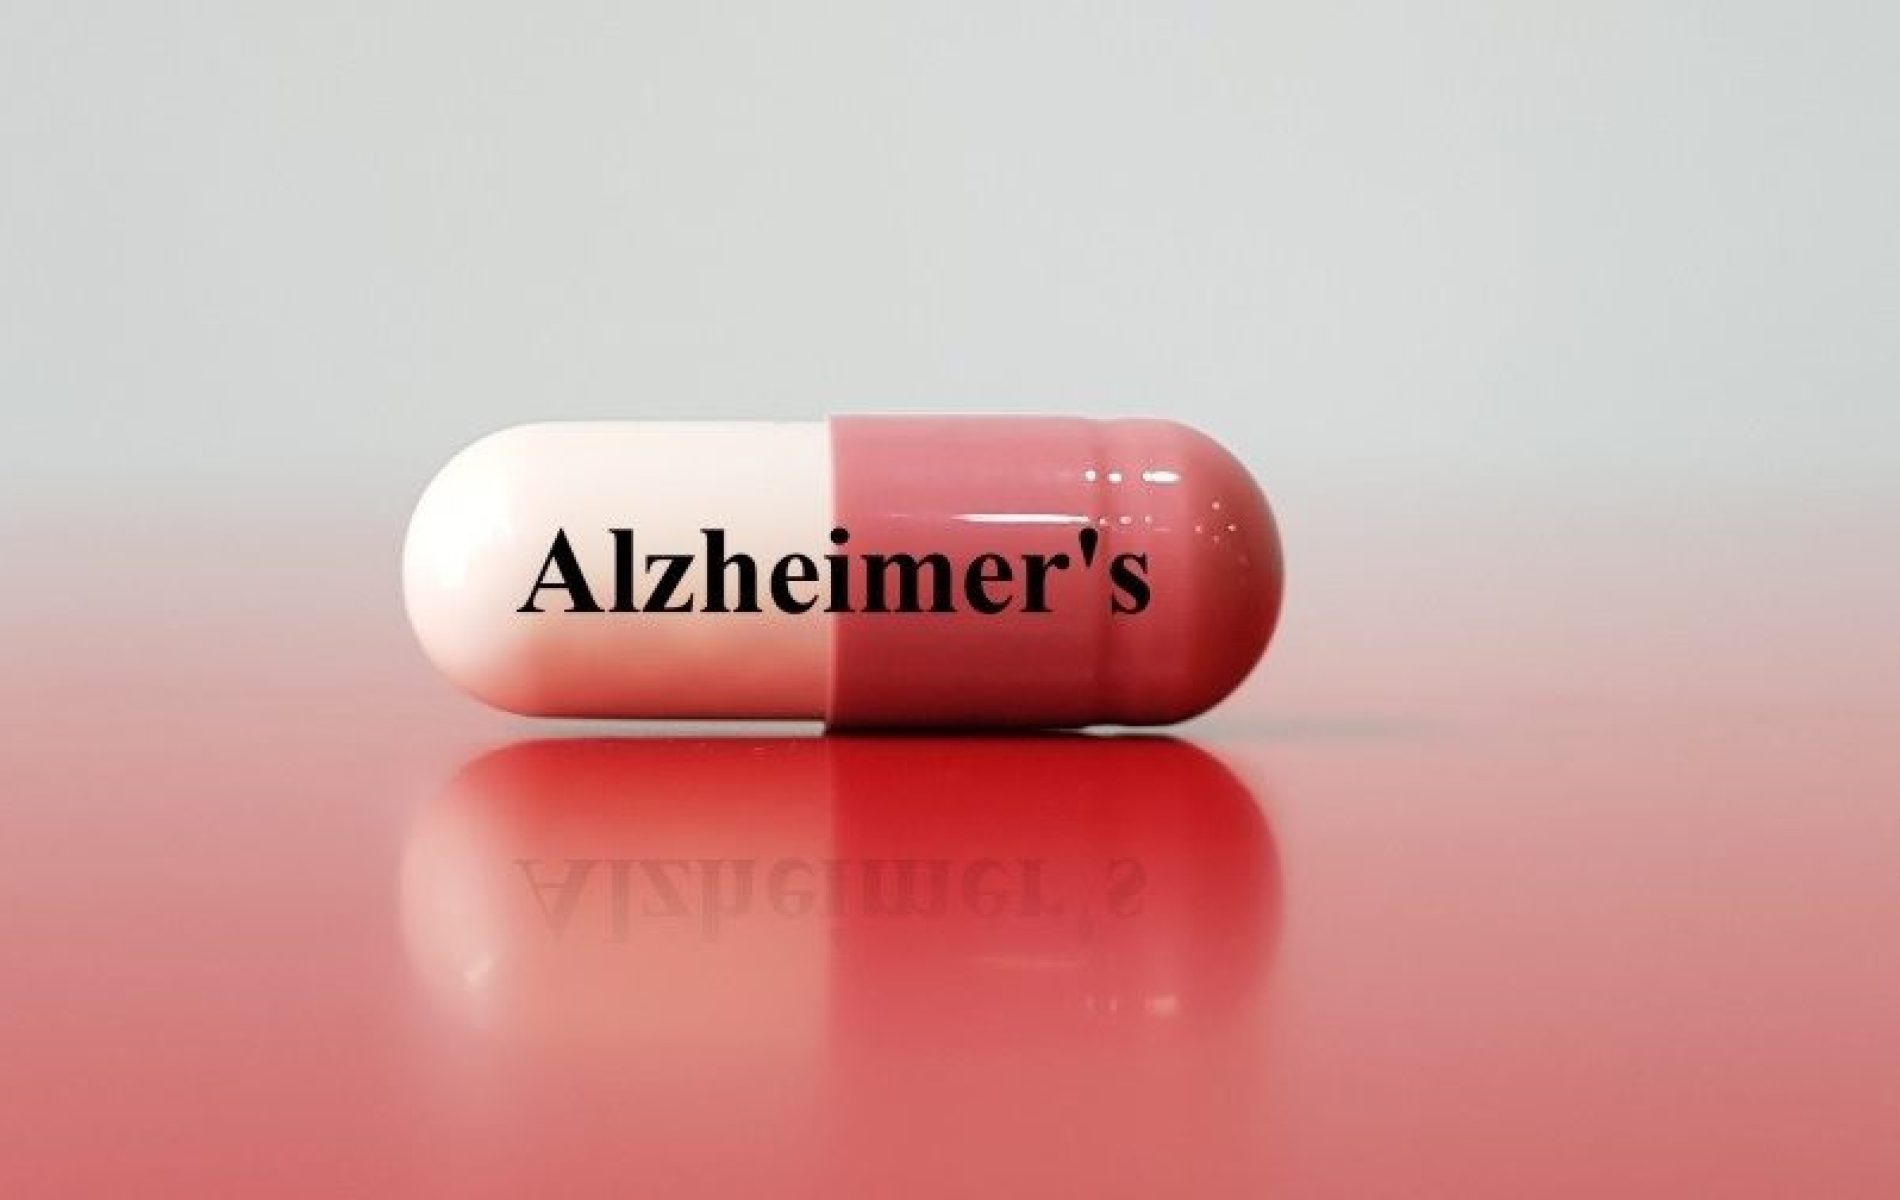 alzheimers causes and treatments